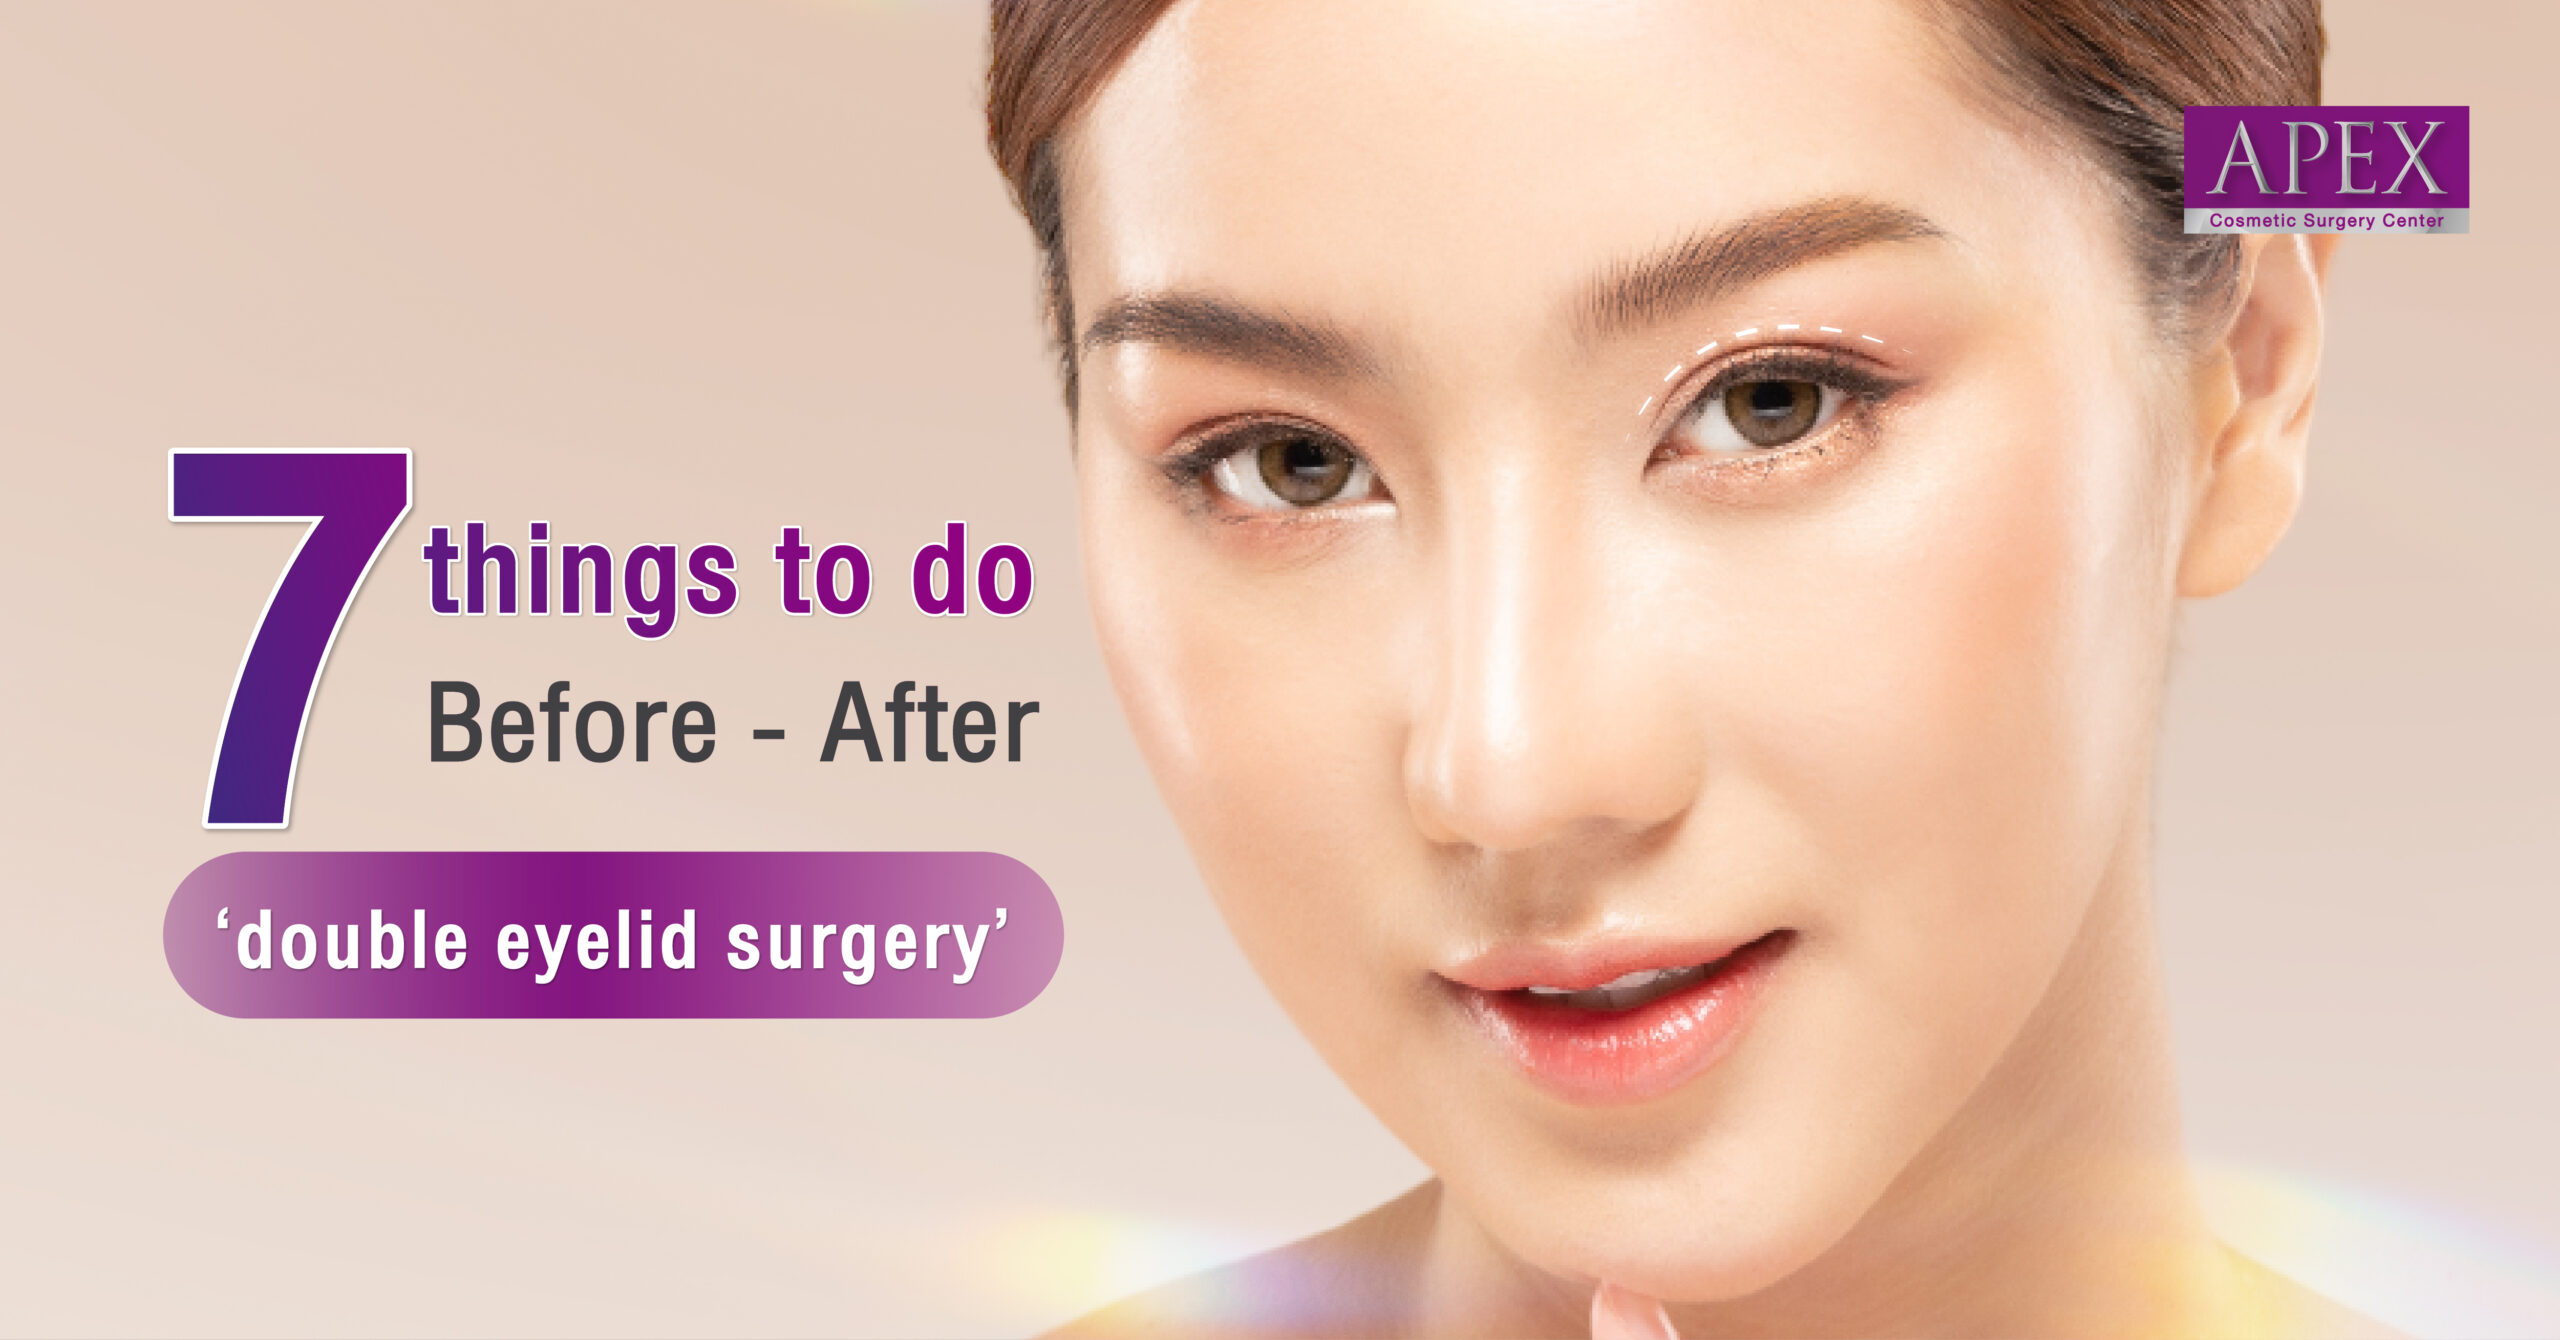 7 things to do Before and after double eyelid surgery